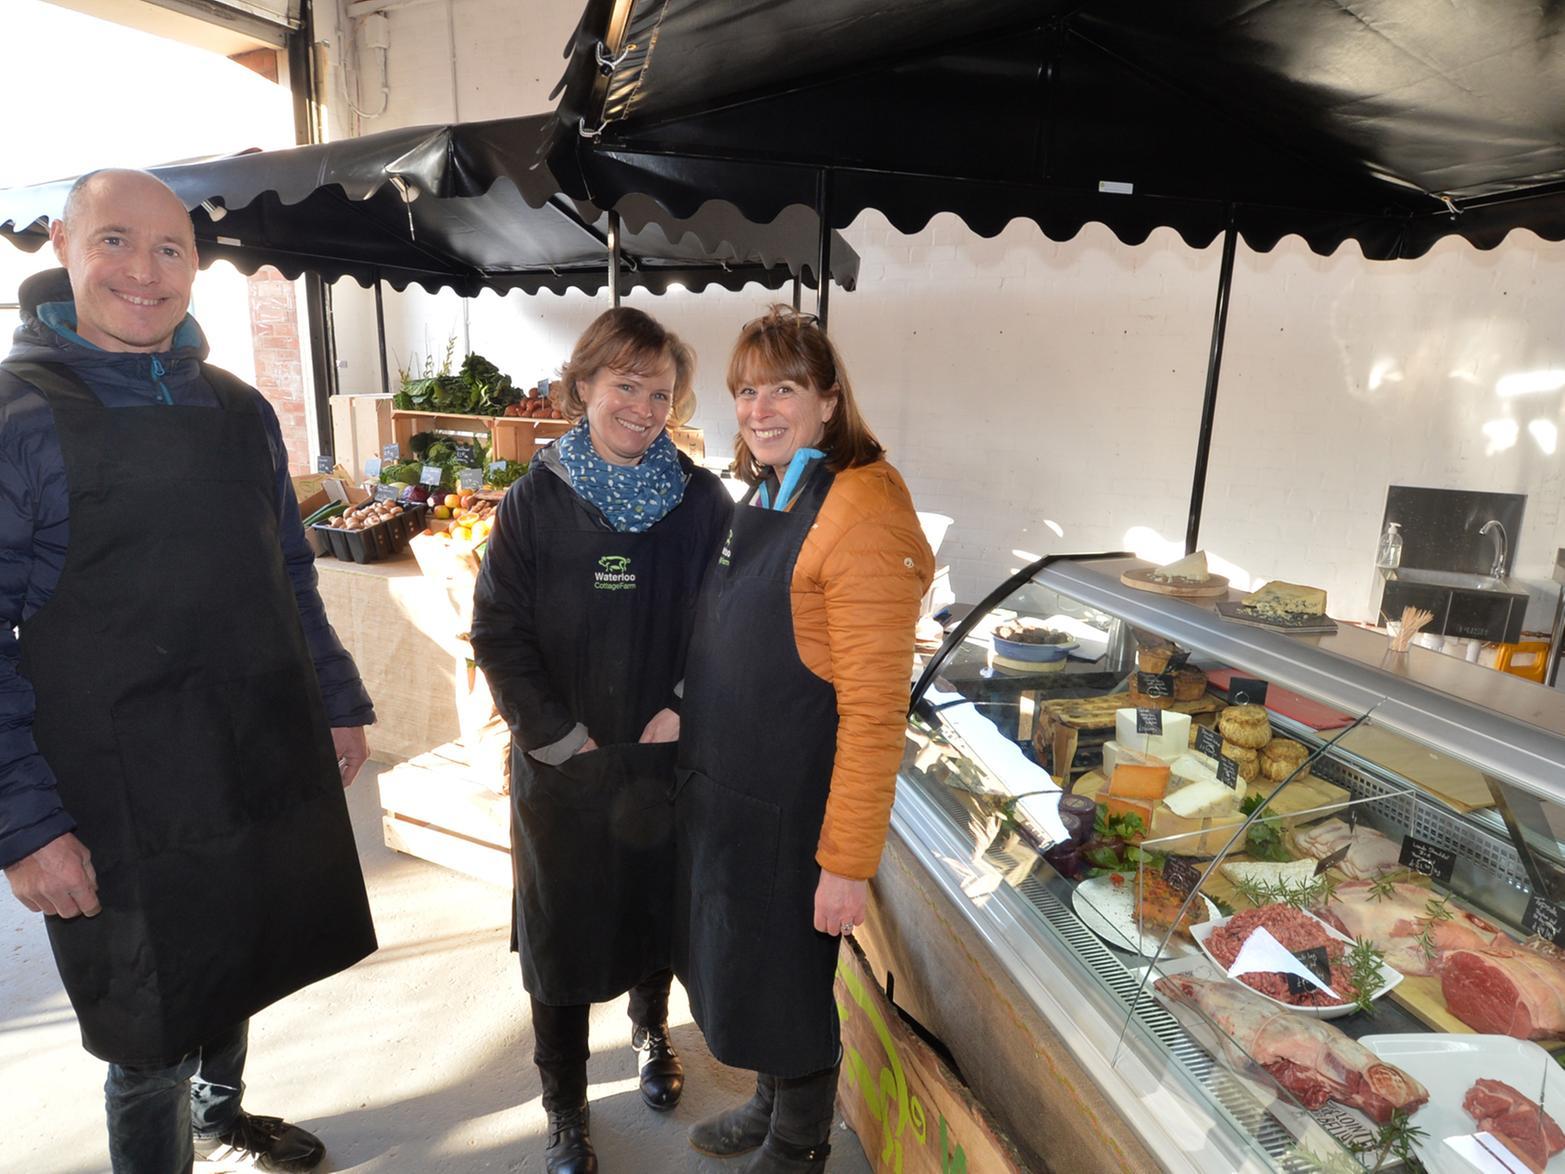 Andy Pearman of Pearman Groceries with Kirsty Clarke and Jacqui Mowson of Waterloo Grange Farm.